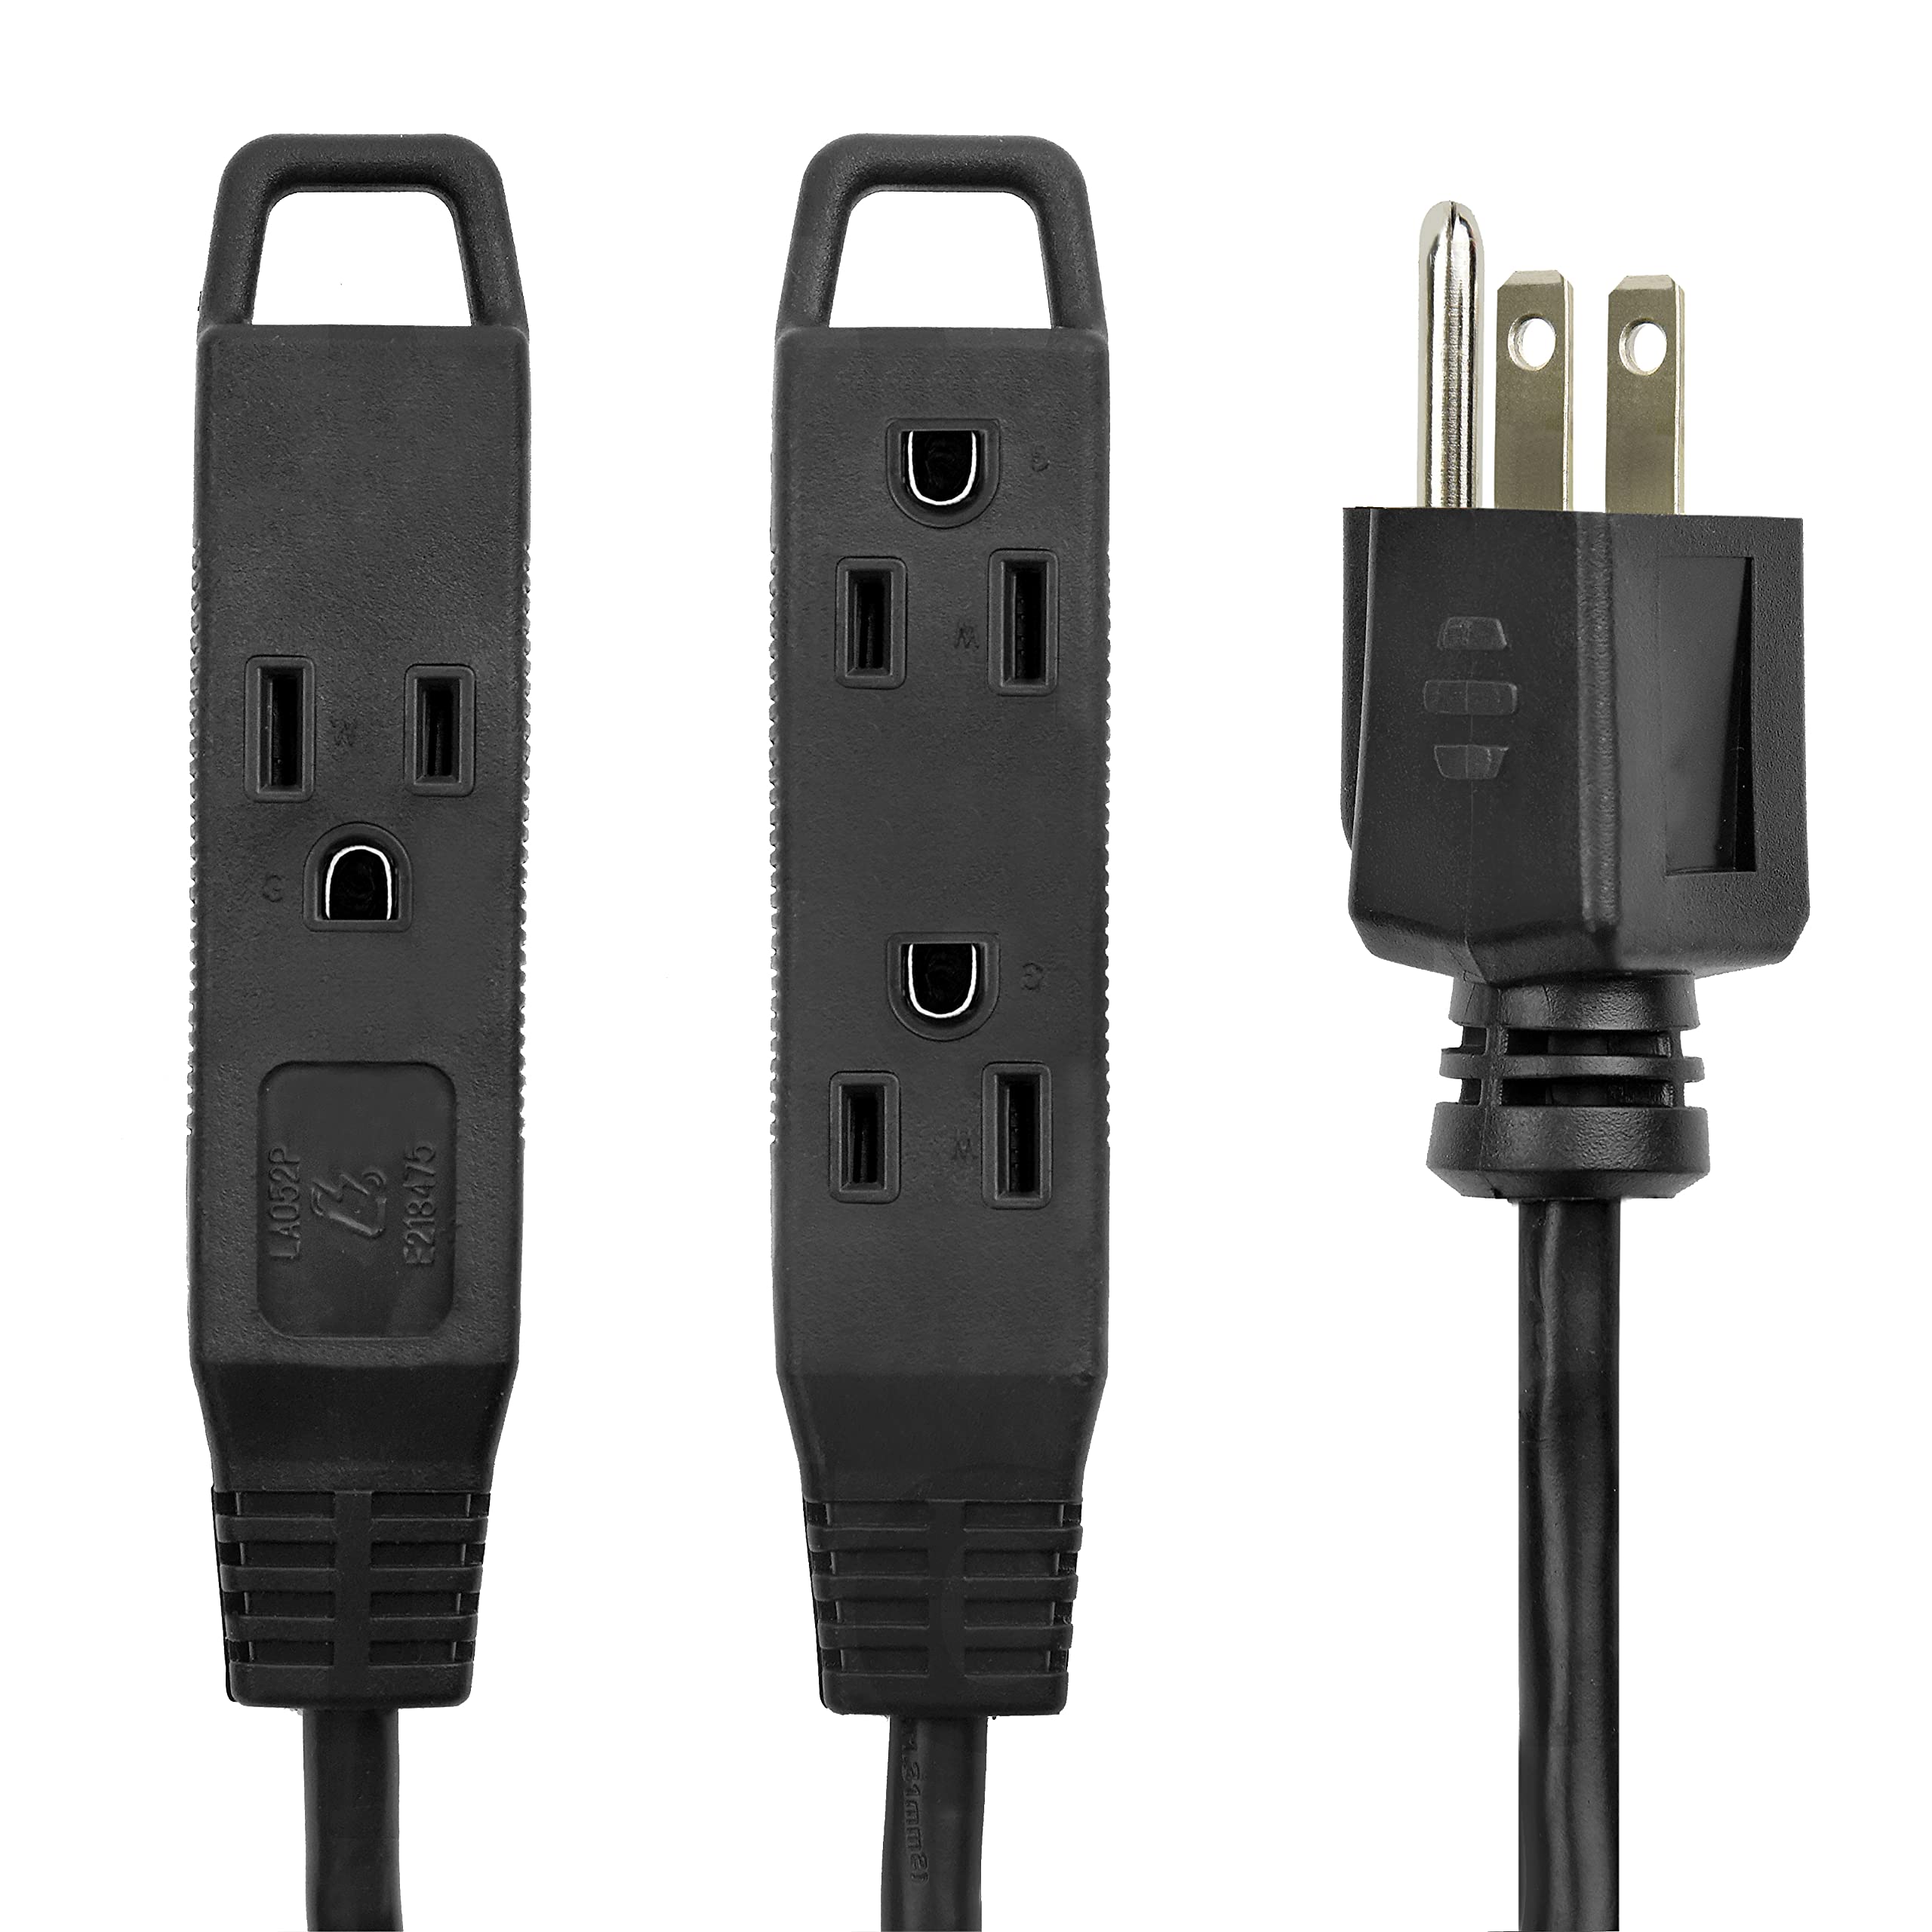 BindMaster Extension Cord/Wire Power Cable, 16/3, 3 Outlet, UL Listed, Black  - Like New